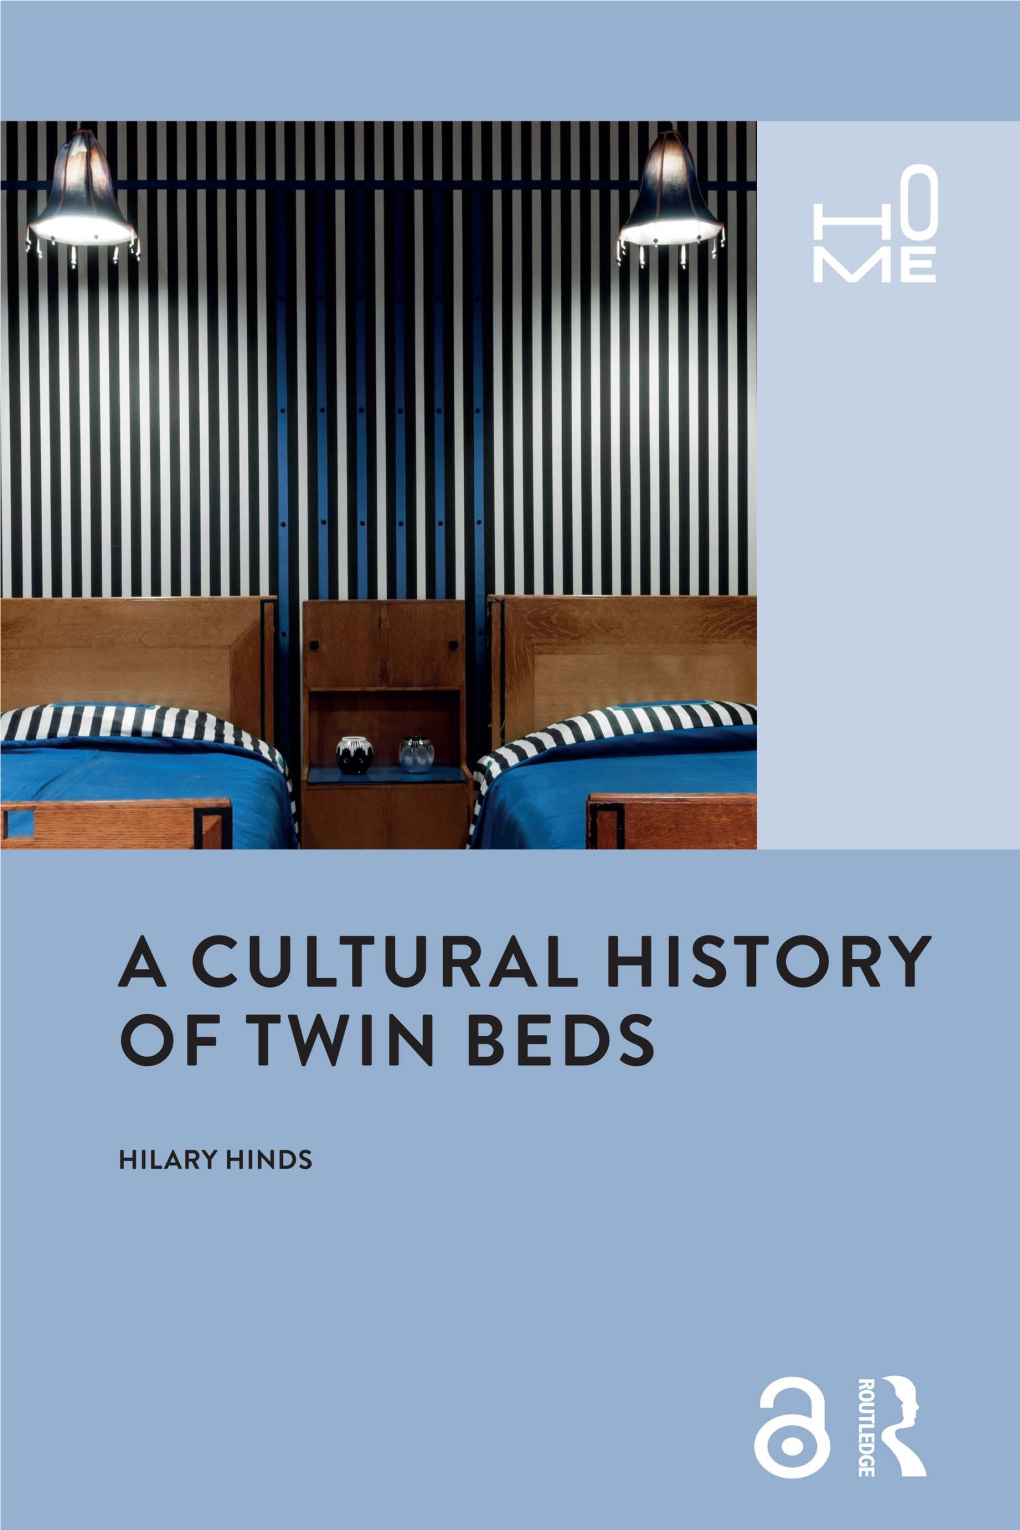 A Cultural History of Twin Beds HOME